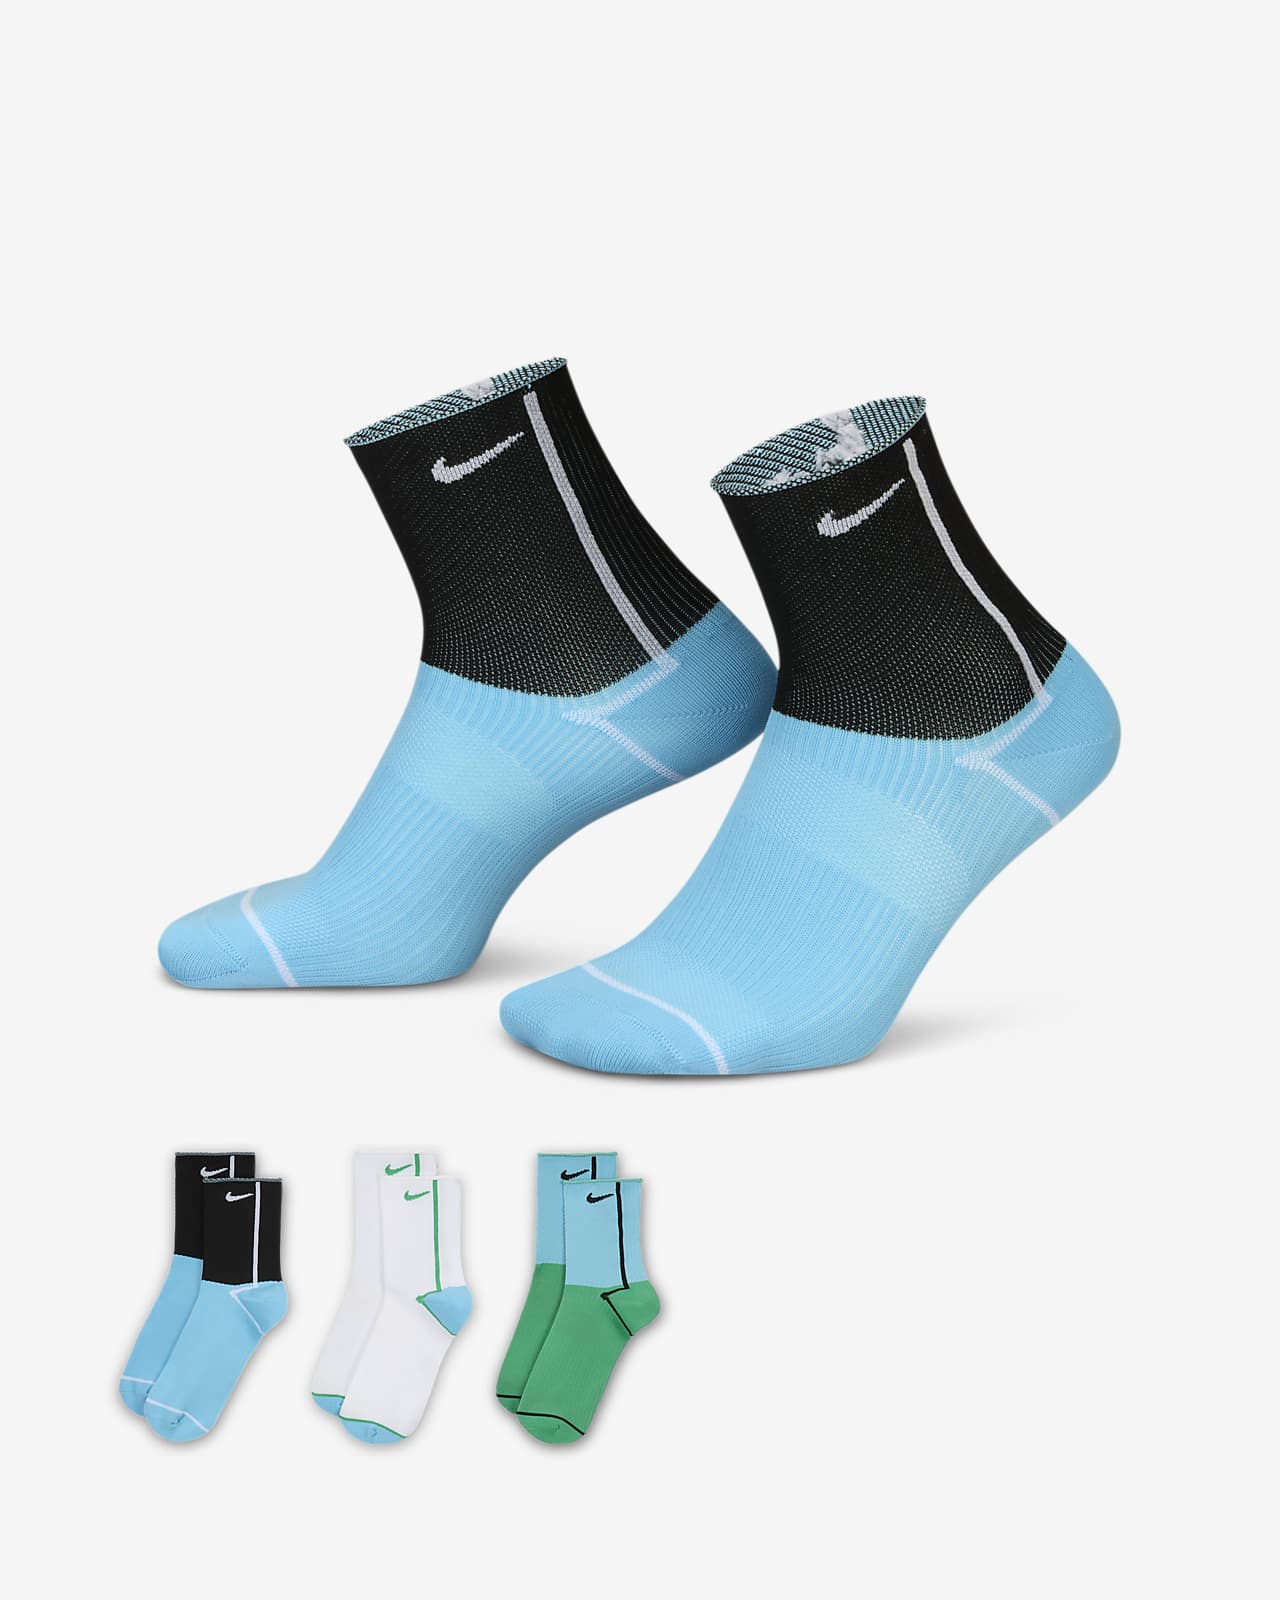 NIKE SOCKS 3 PAIRS PACK - LIGHTWEIGHT CREW ANKLE MENS WOMENS SPORTS